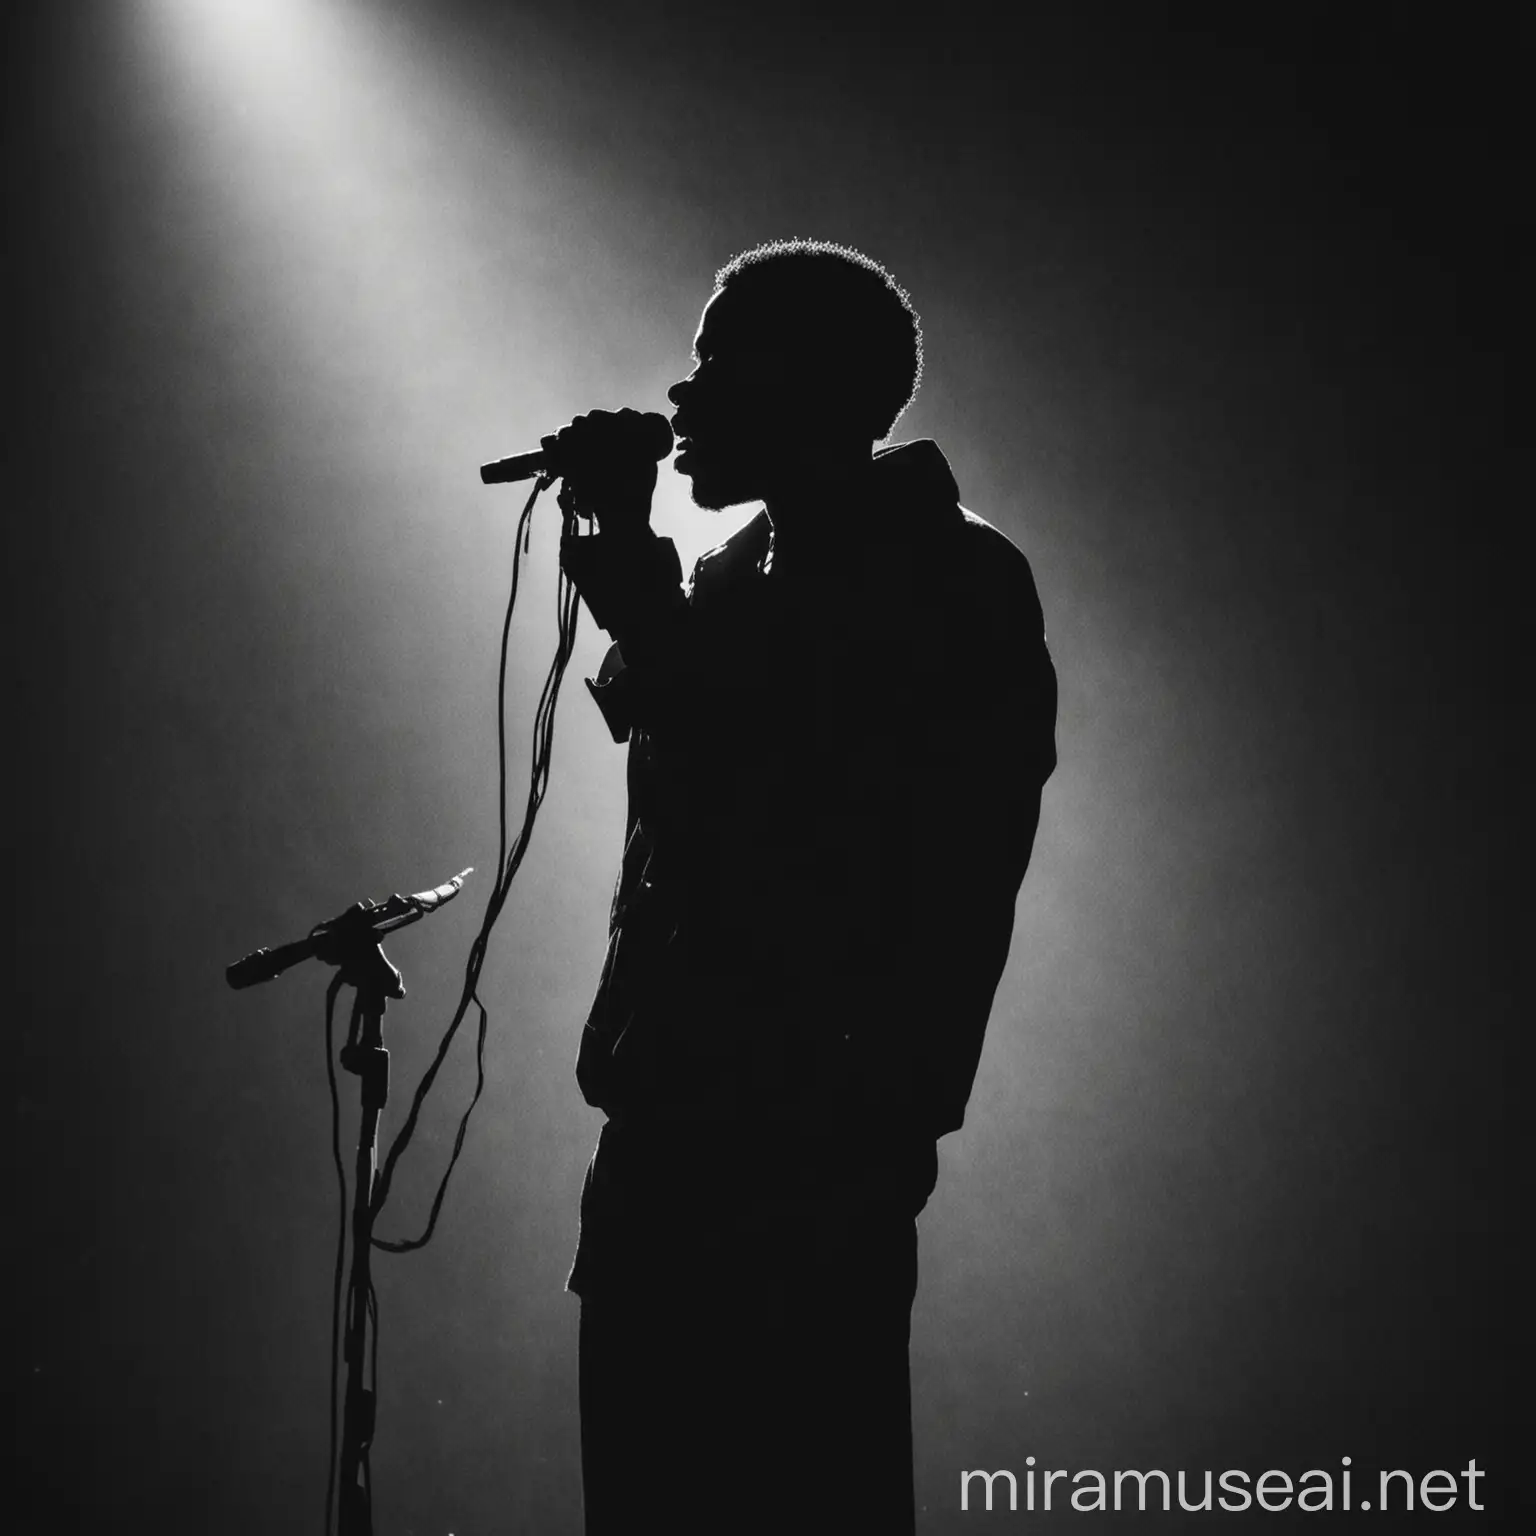 a silhouette of a black man performing with a microphone in his hands